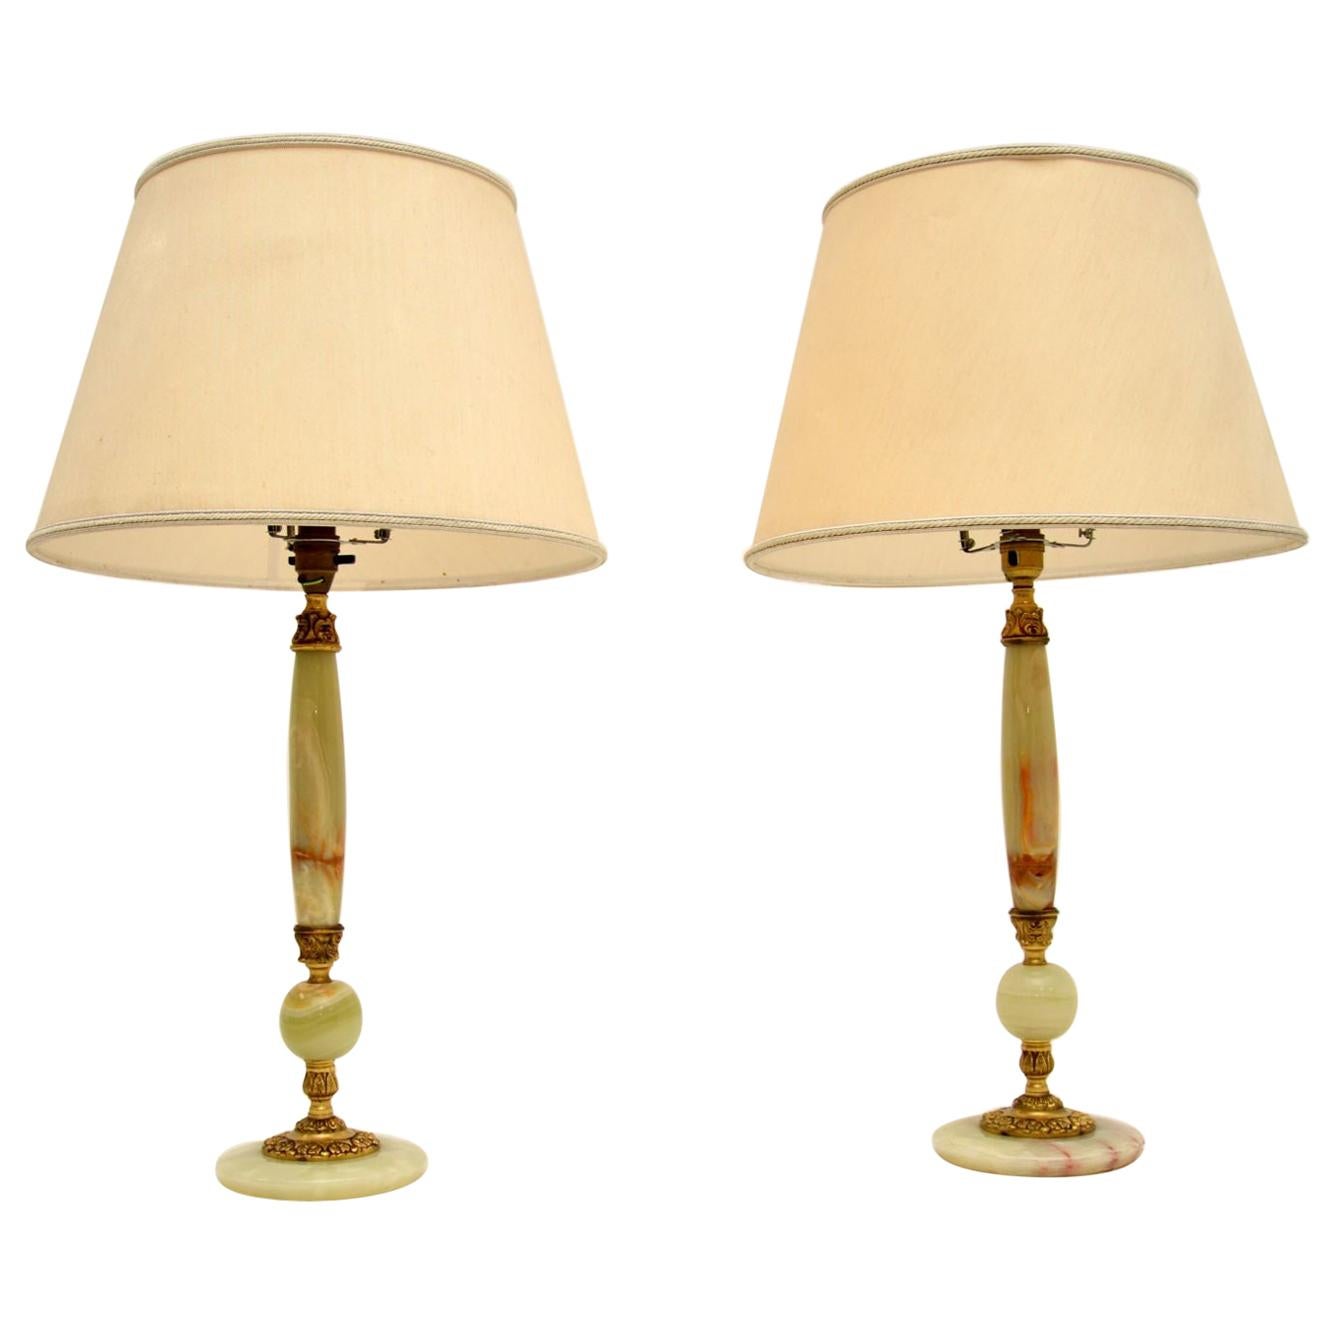 Pair of Antique French Style Onyx Table Lamps